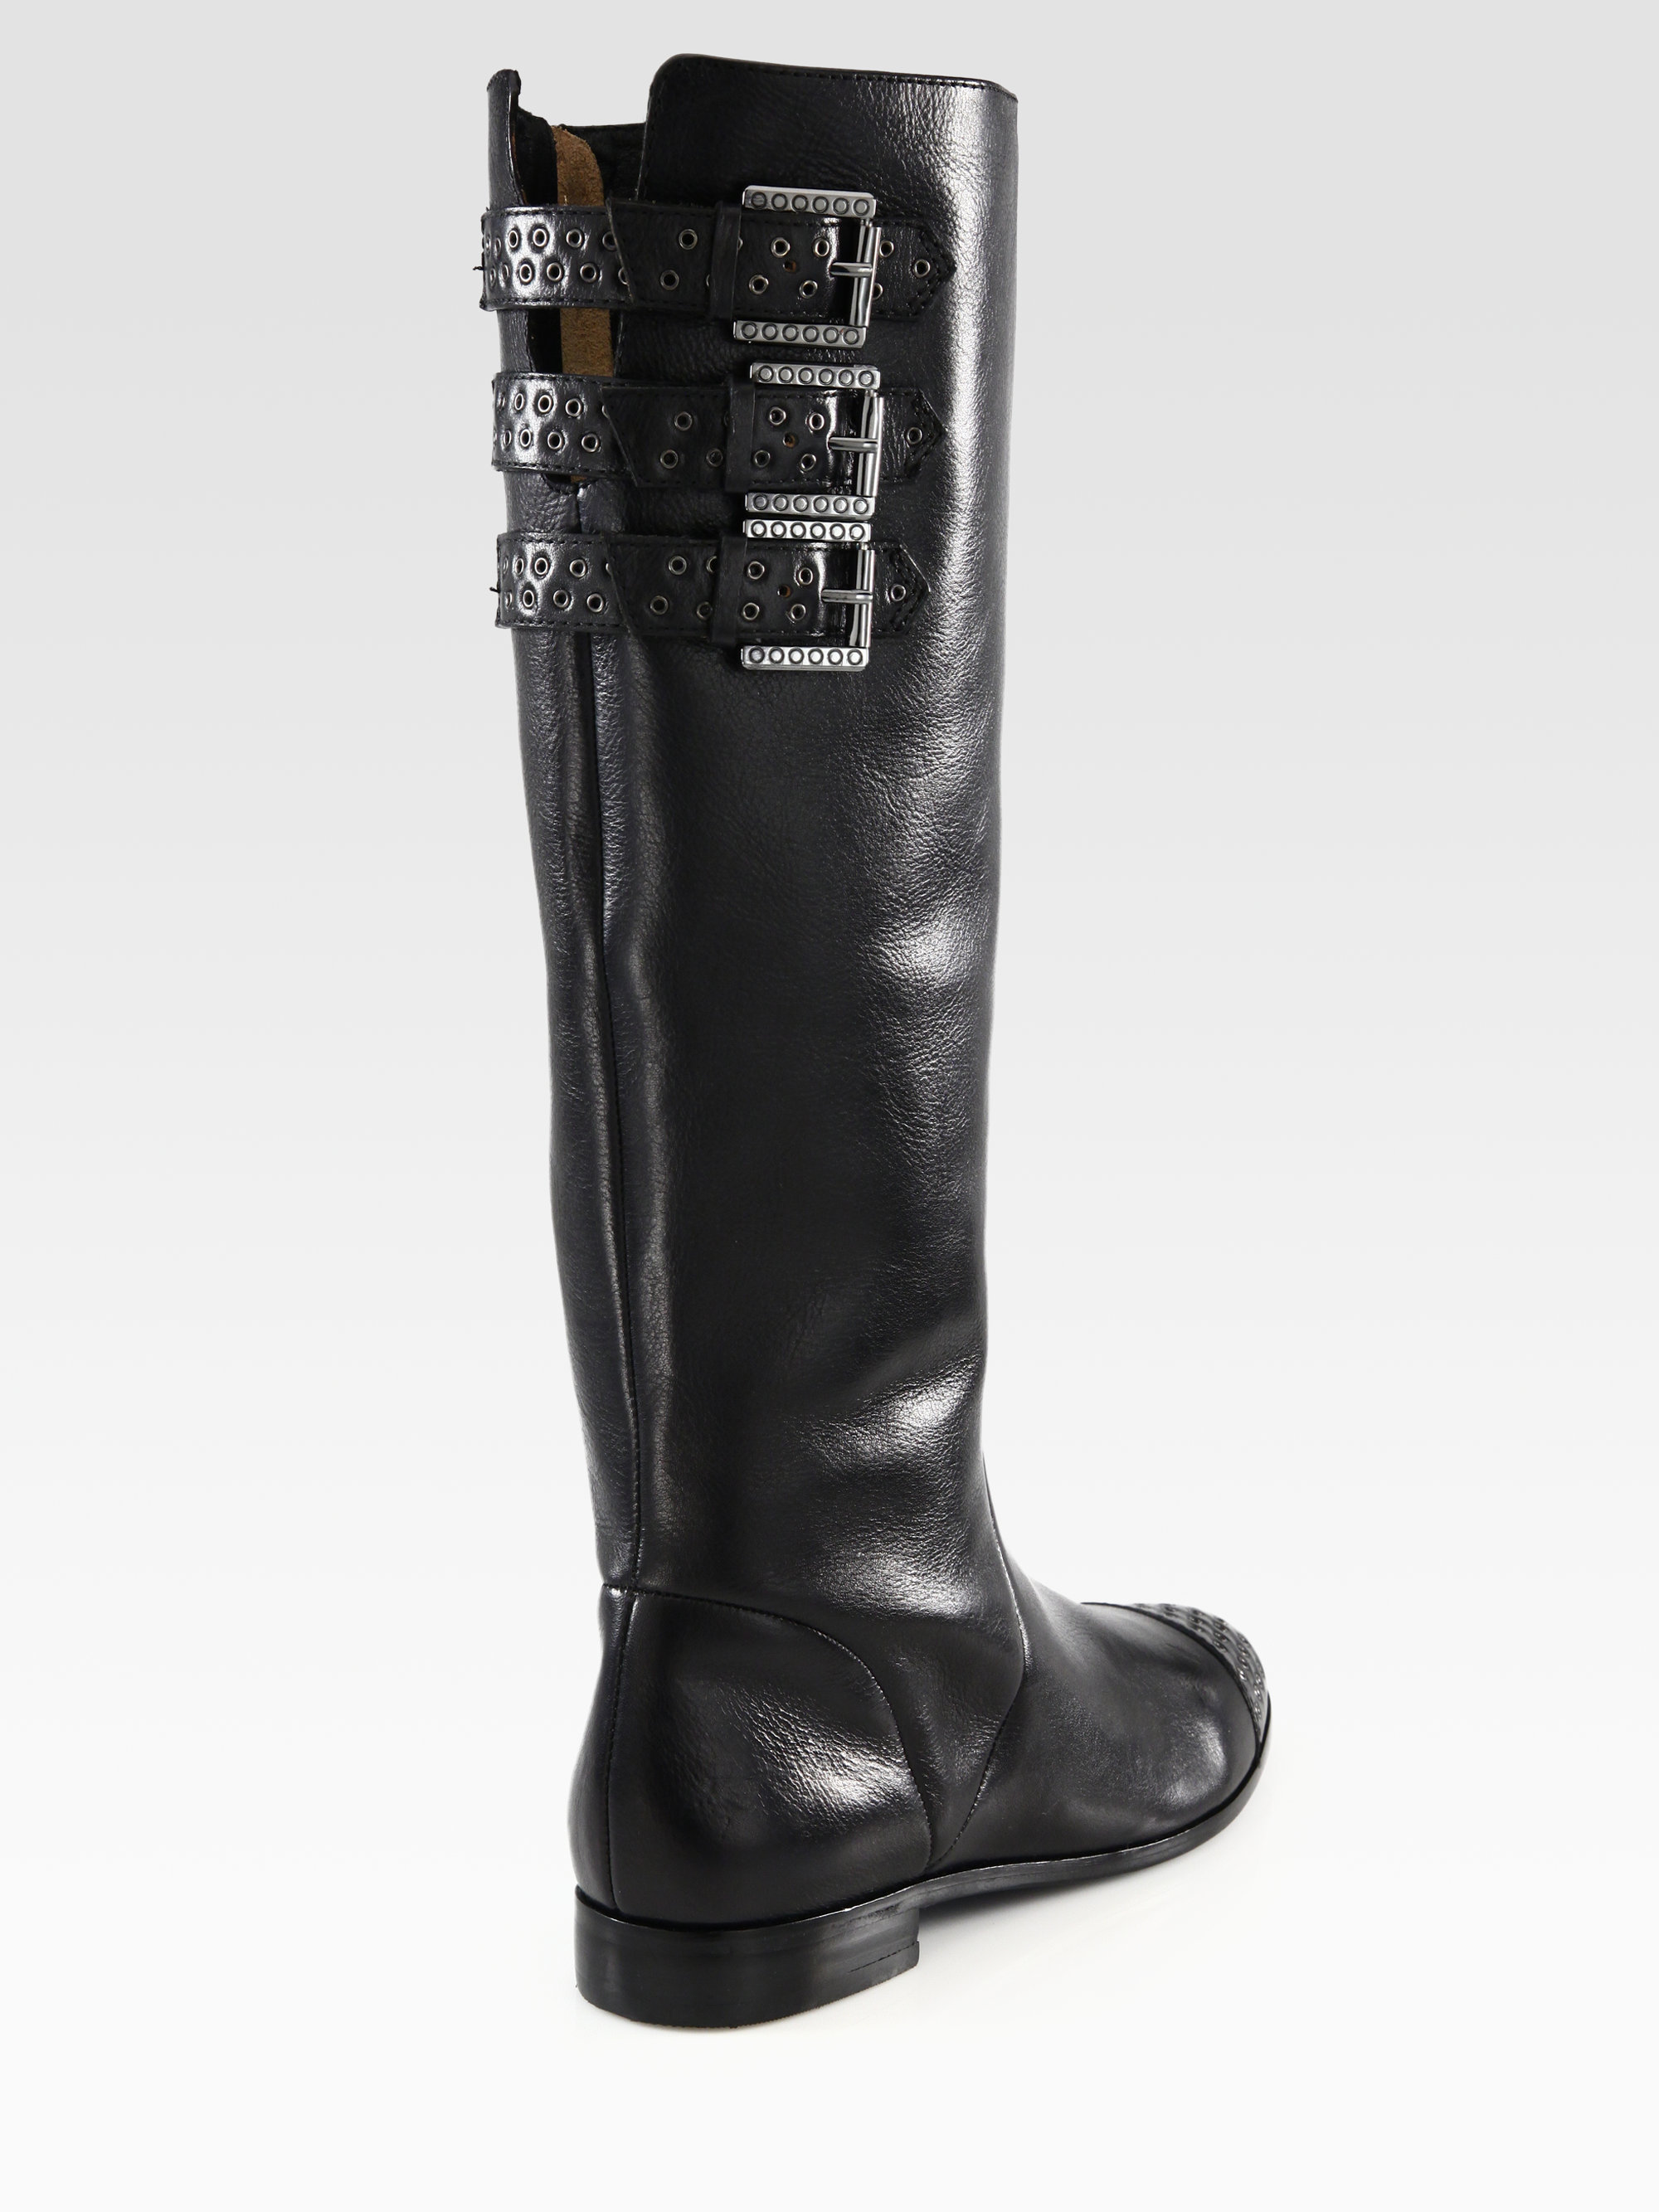 Rebecca Minkoff Rogan Leather Grommet Detail Riding Boots in Black | Lyst